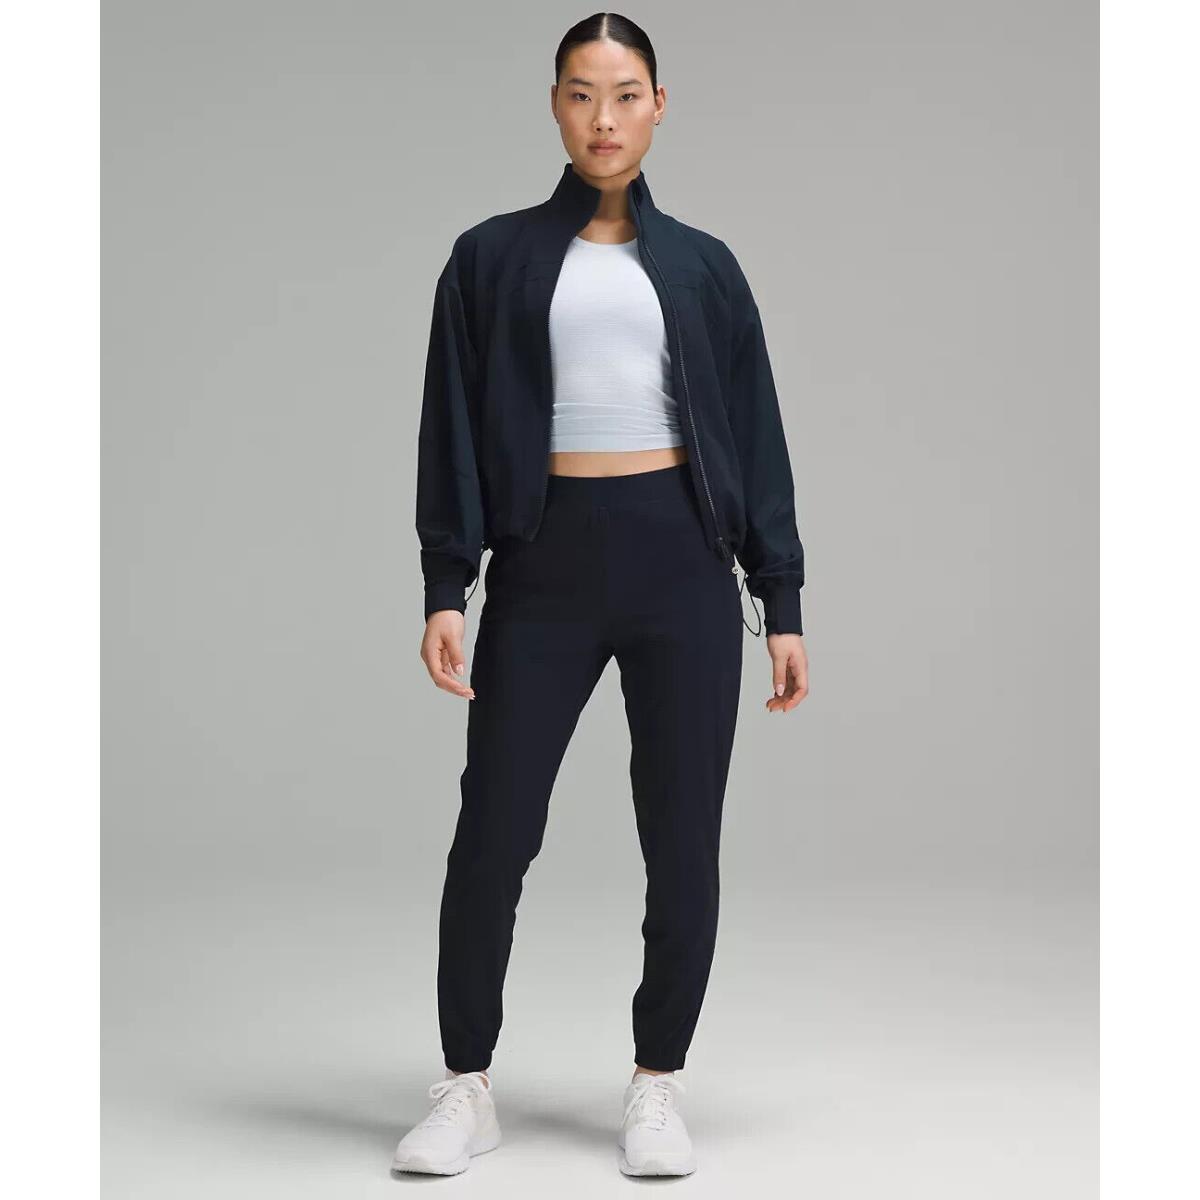 Lululemon Adapted State High-rise Jogger True Navy Size 2. LW5CVMS